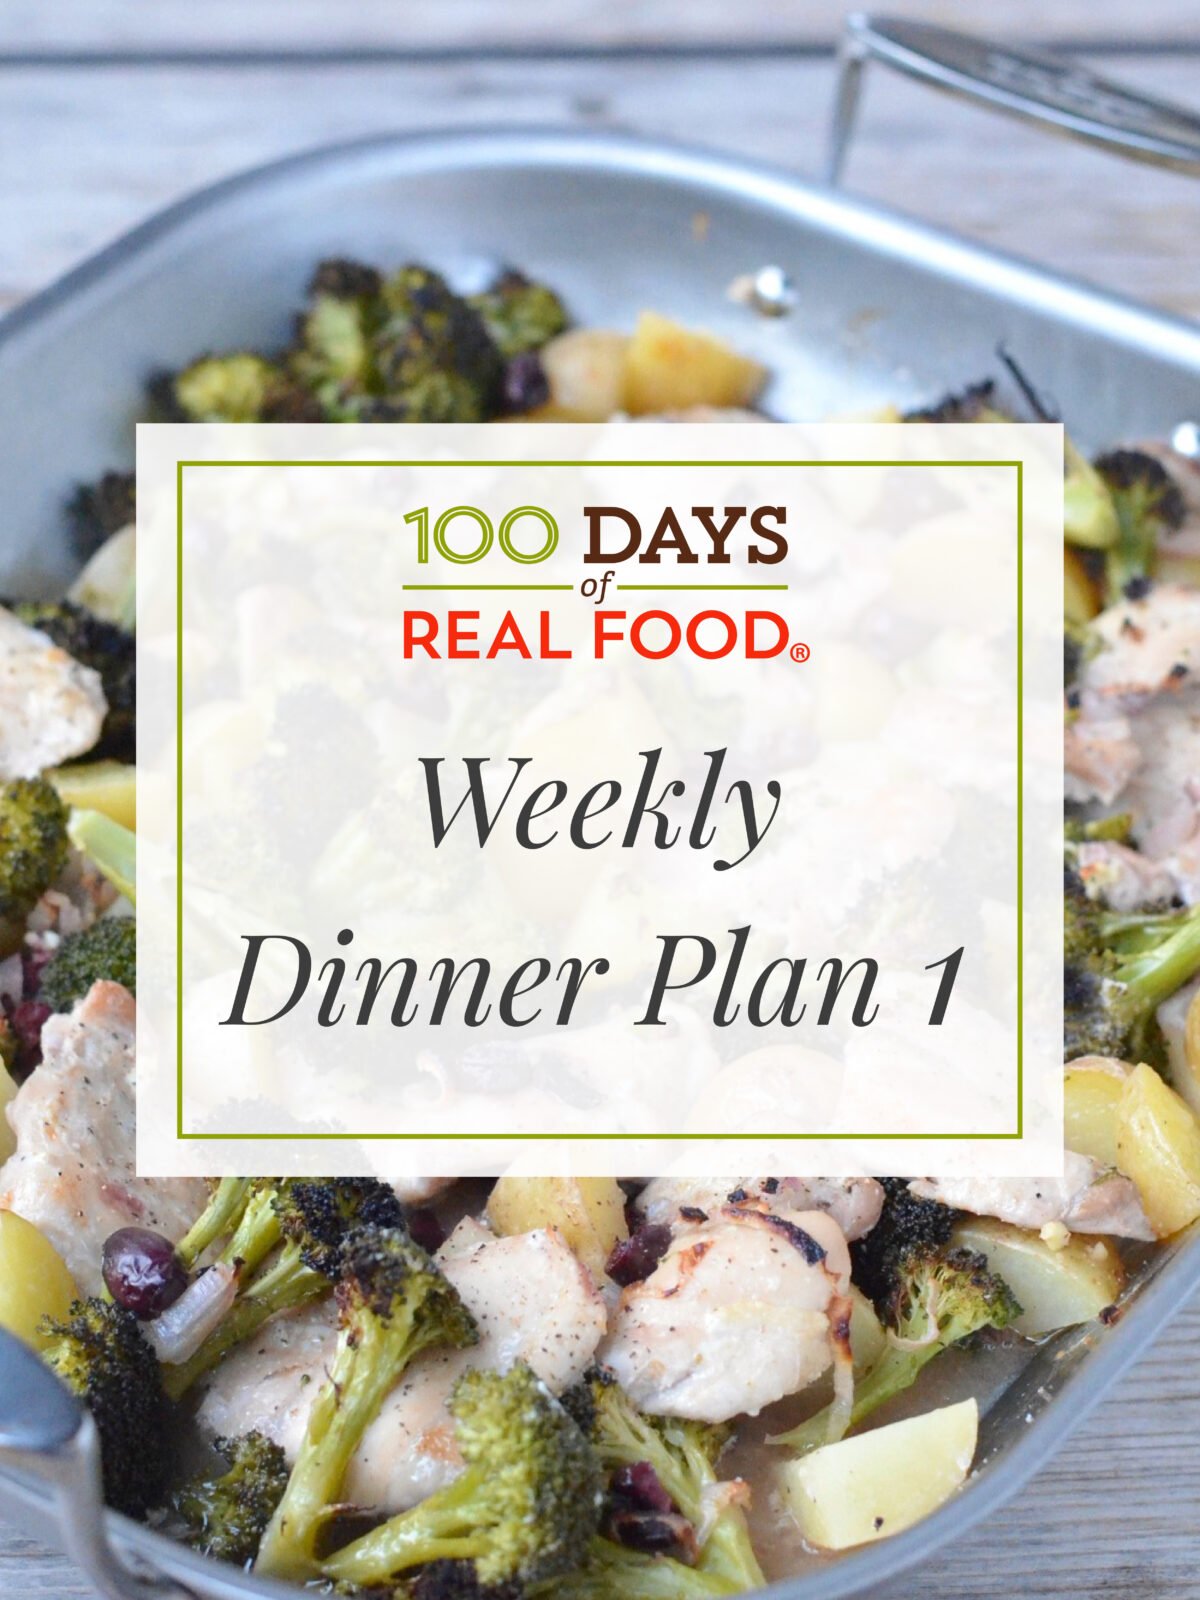 Weekly Dinner Plan 1 on 100 Days of Real Food